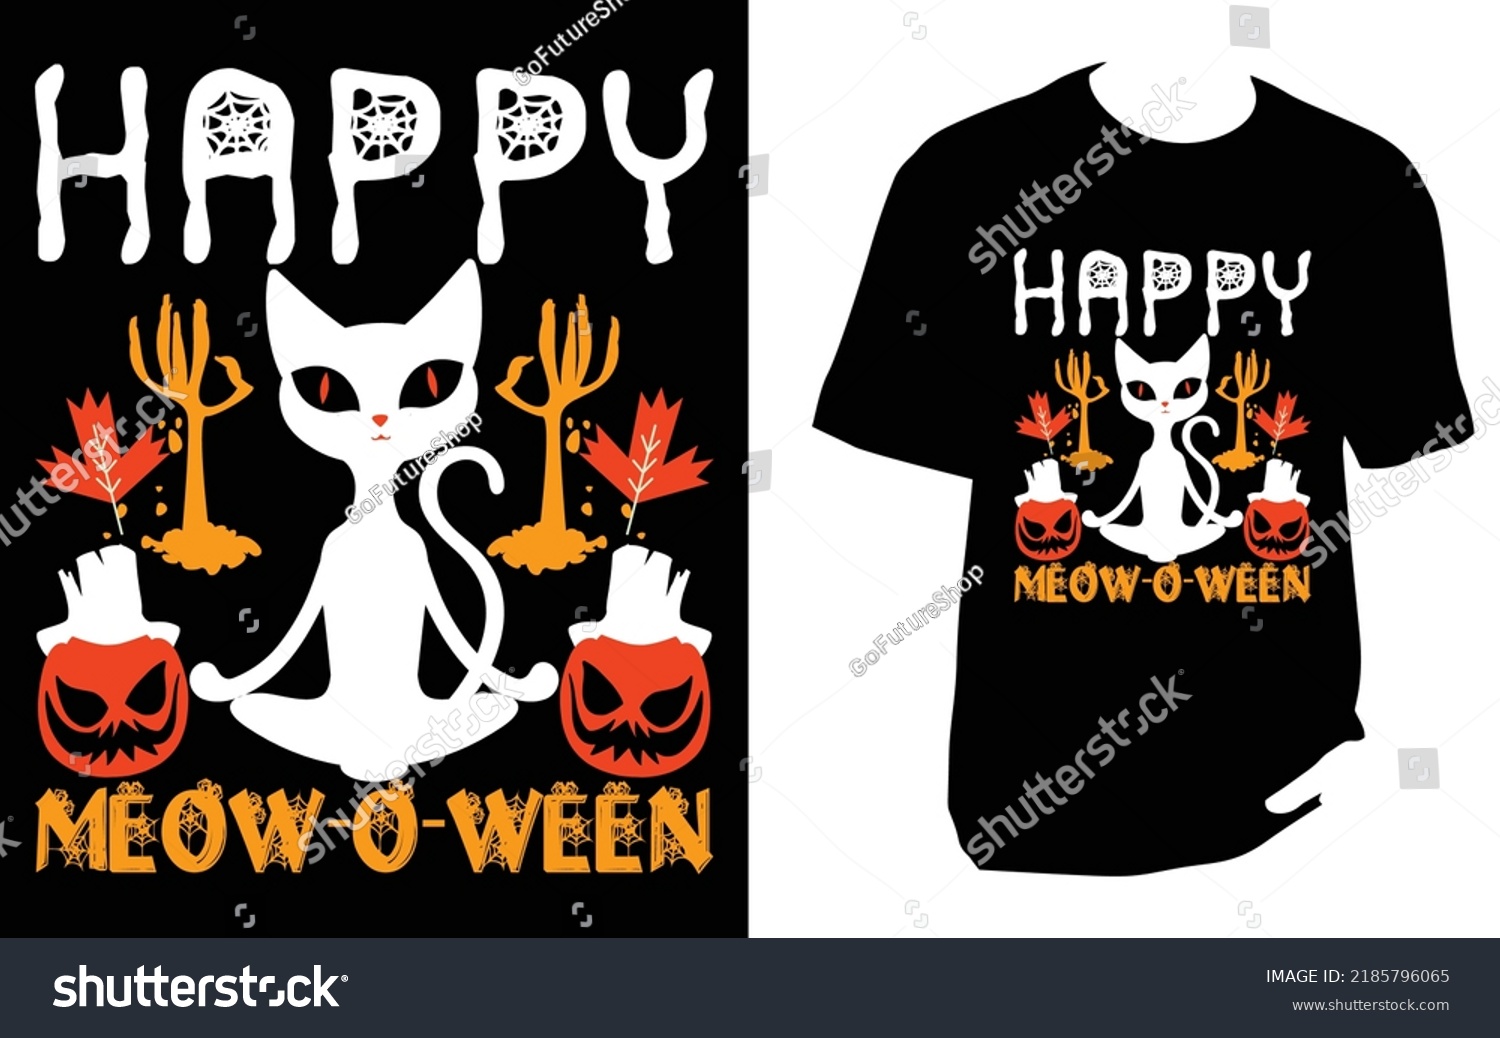 SVG of happy meow o ween Halloween t shirt design svg